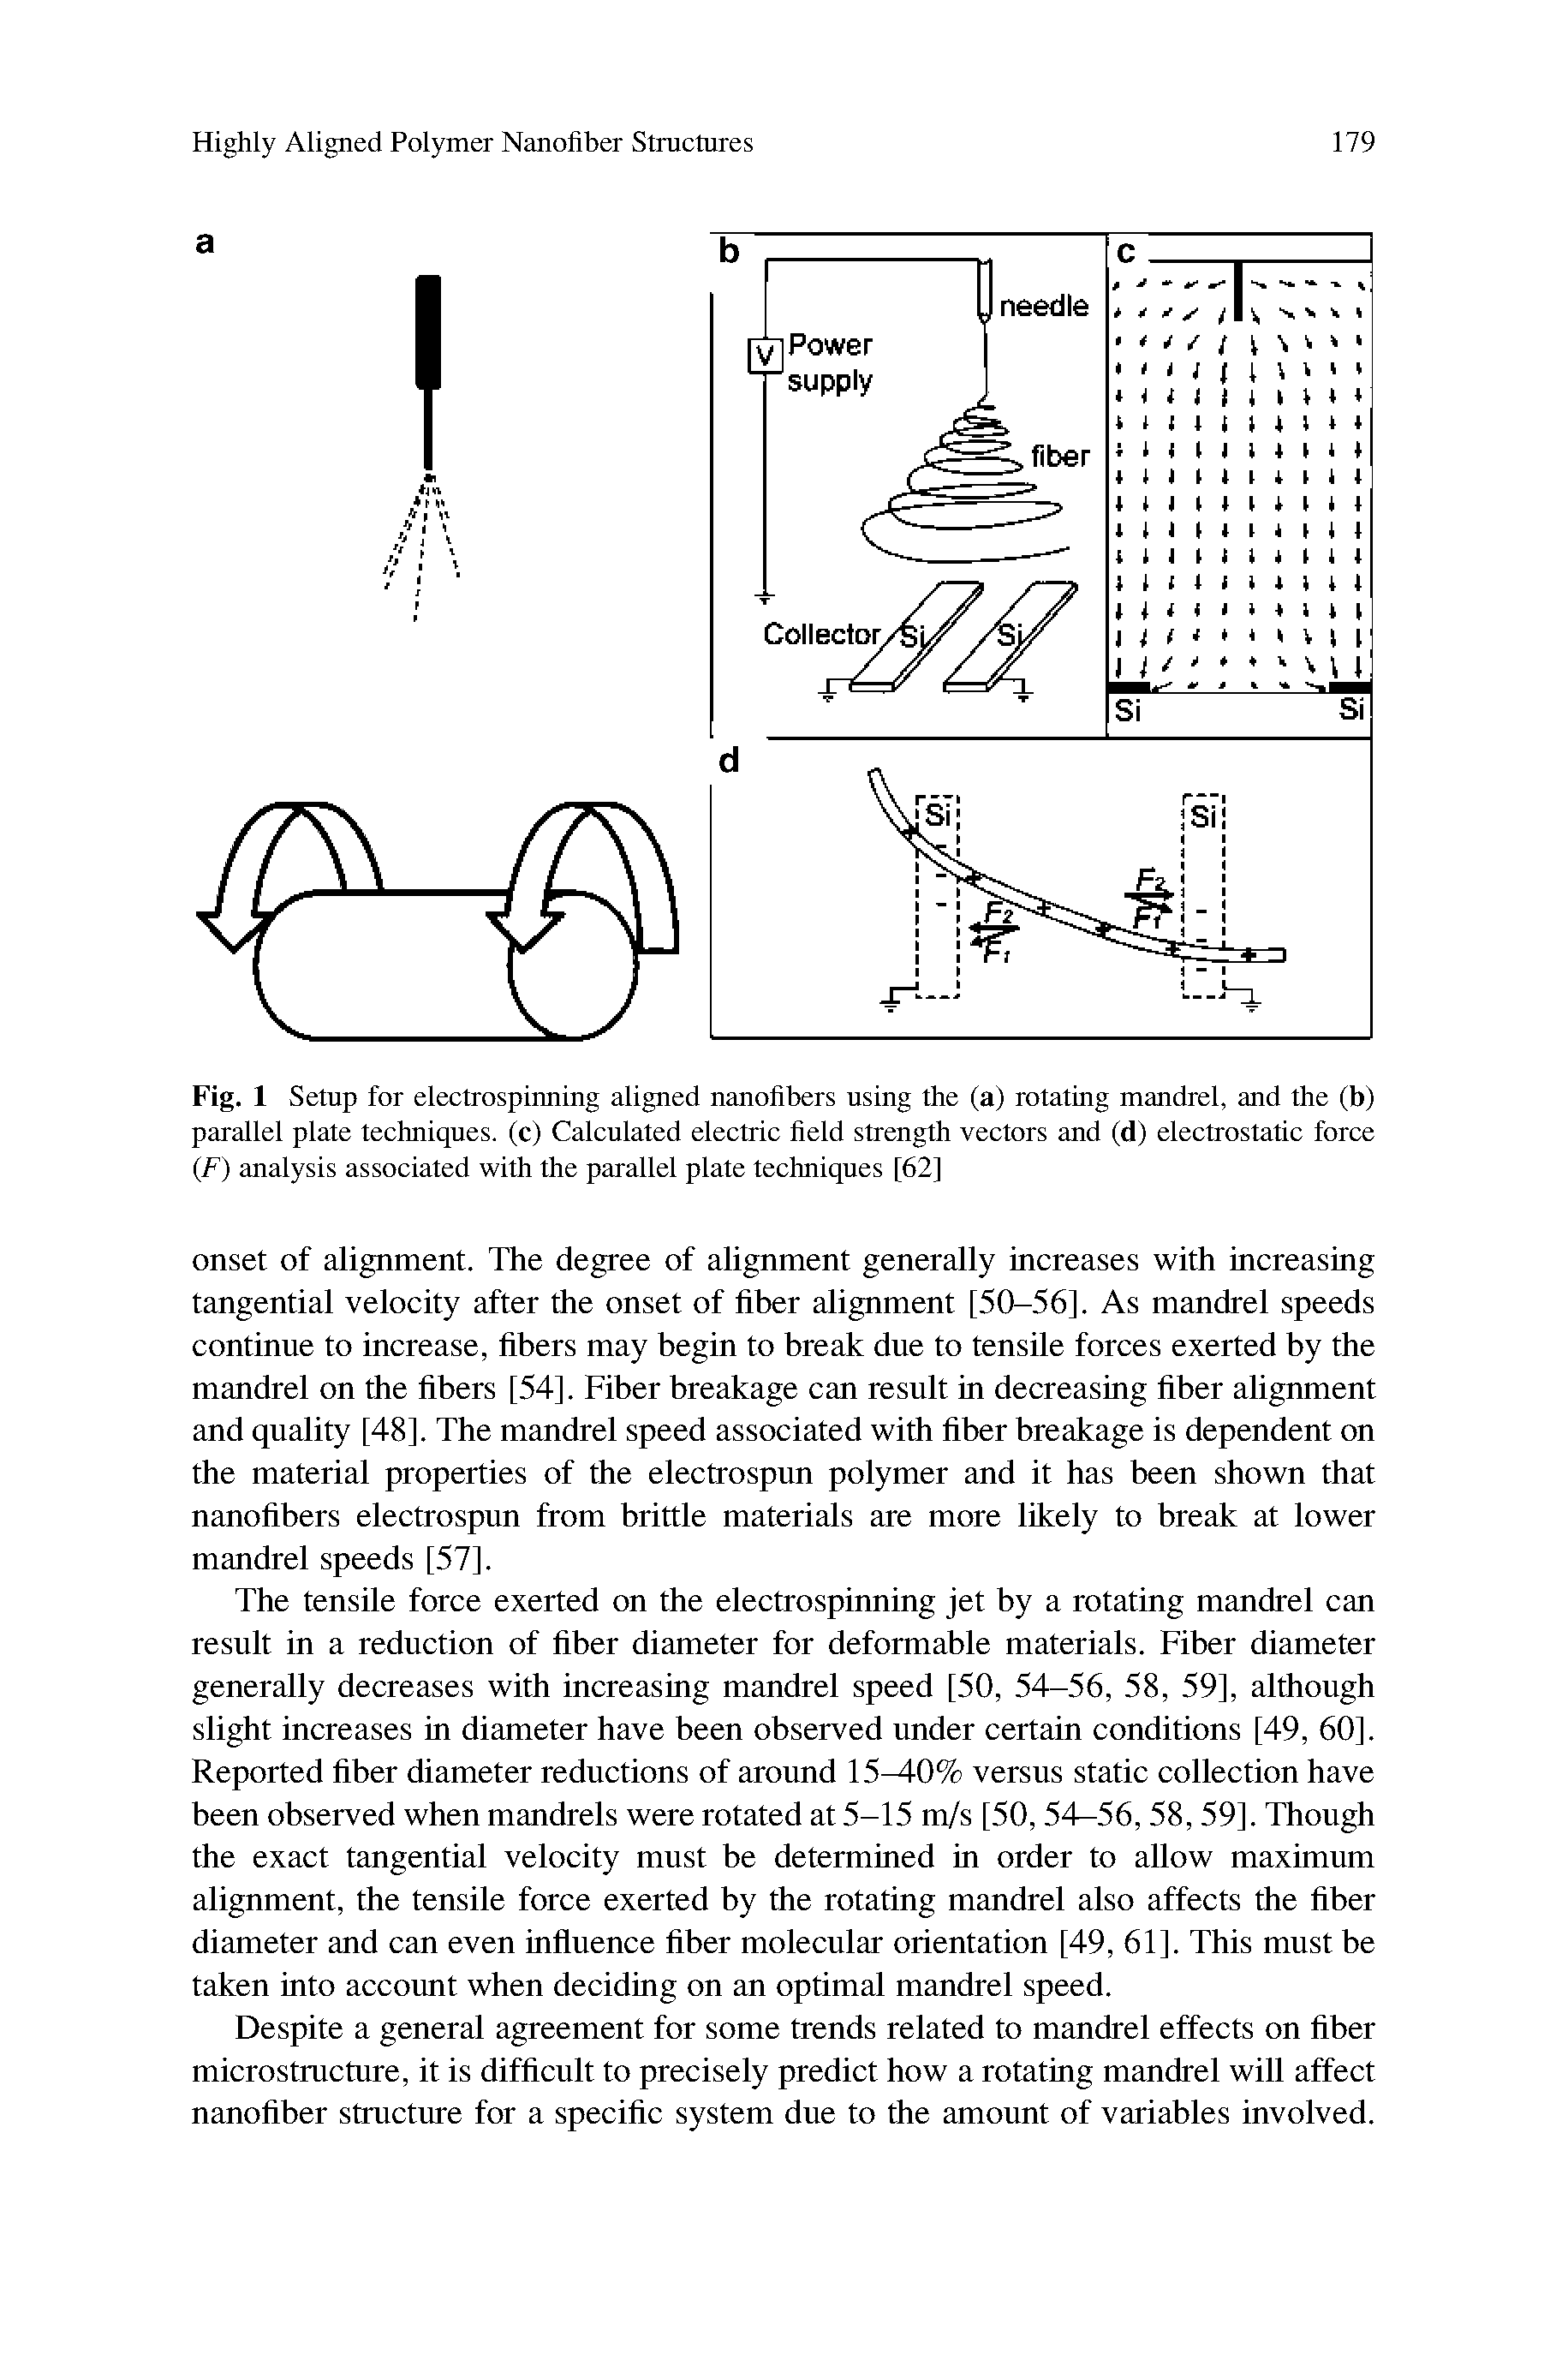 Fig. 1 Setup for electrospinning aligned nanofibers using the (a) rotating mandrel, and the (b) parallel plate techniques, (c) Calculated electric field strength vectors and (d) electrostatic force (F) analysis associated with the parallel plate techniques [62]...